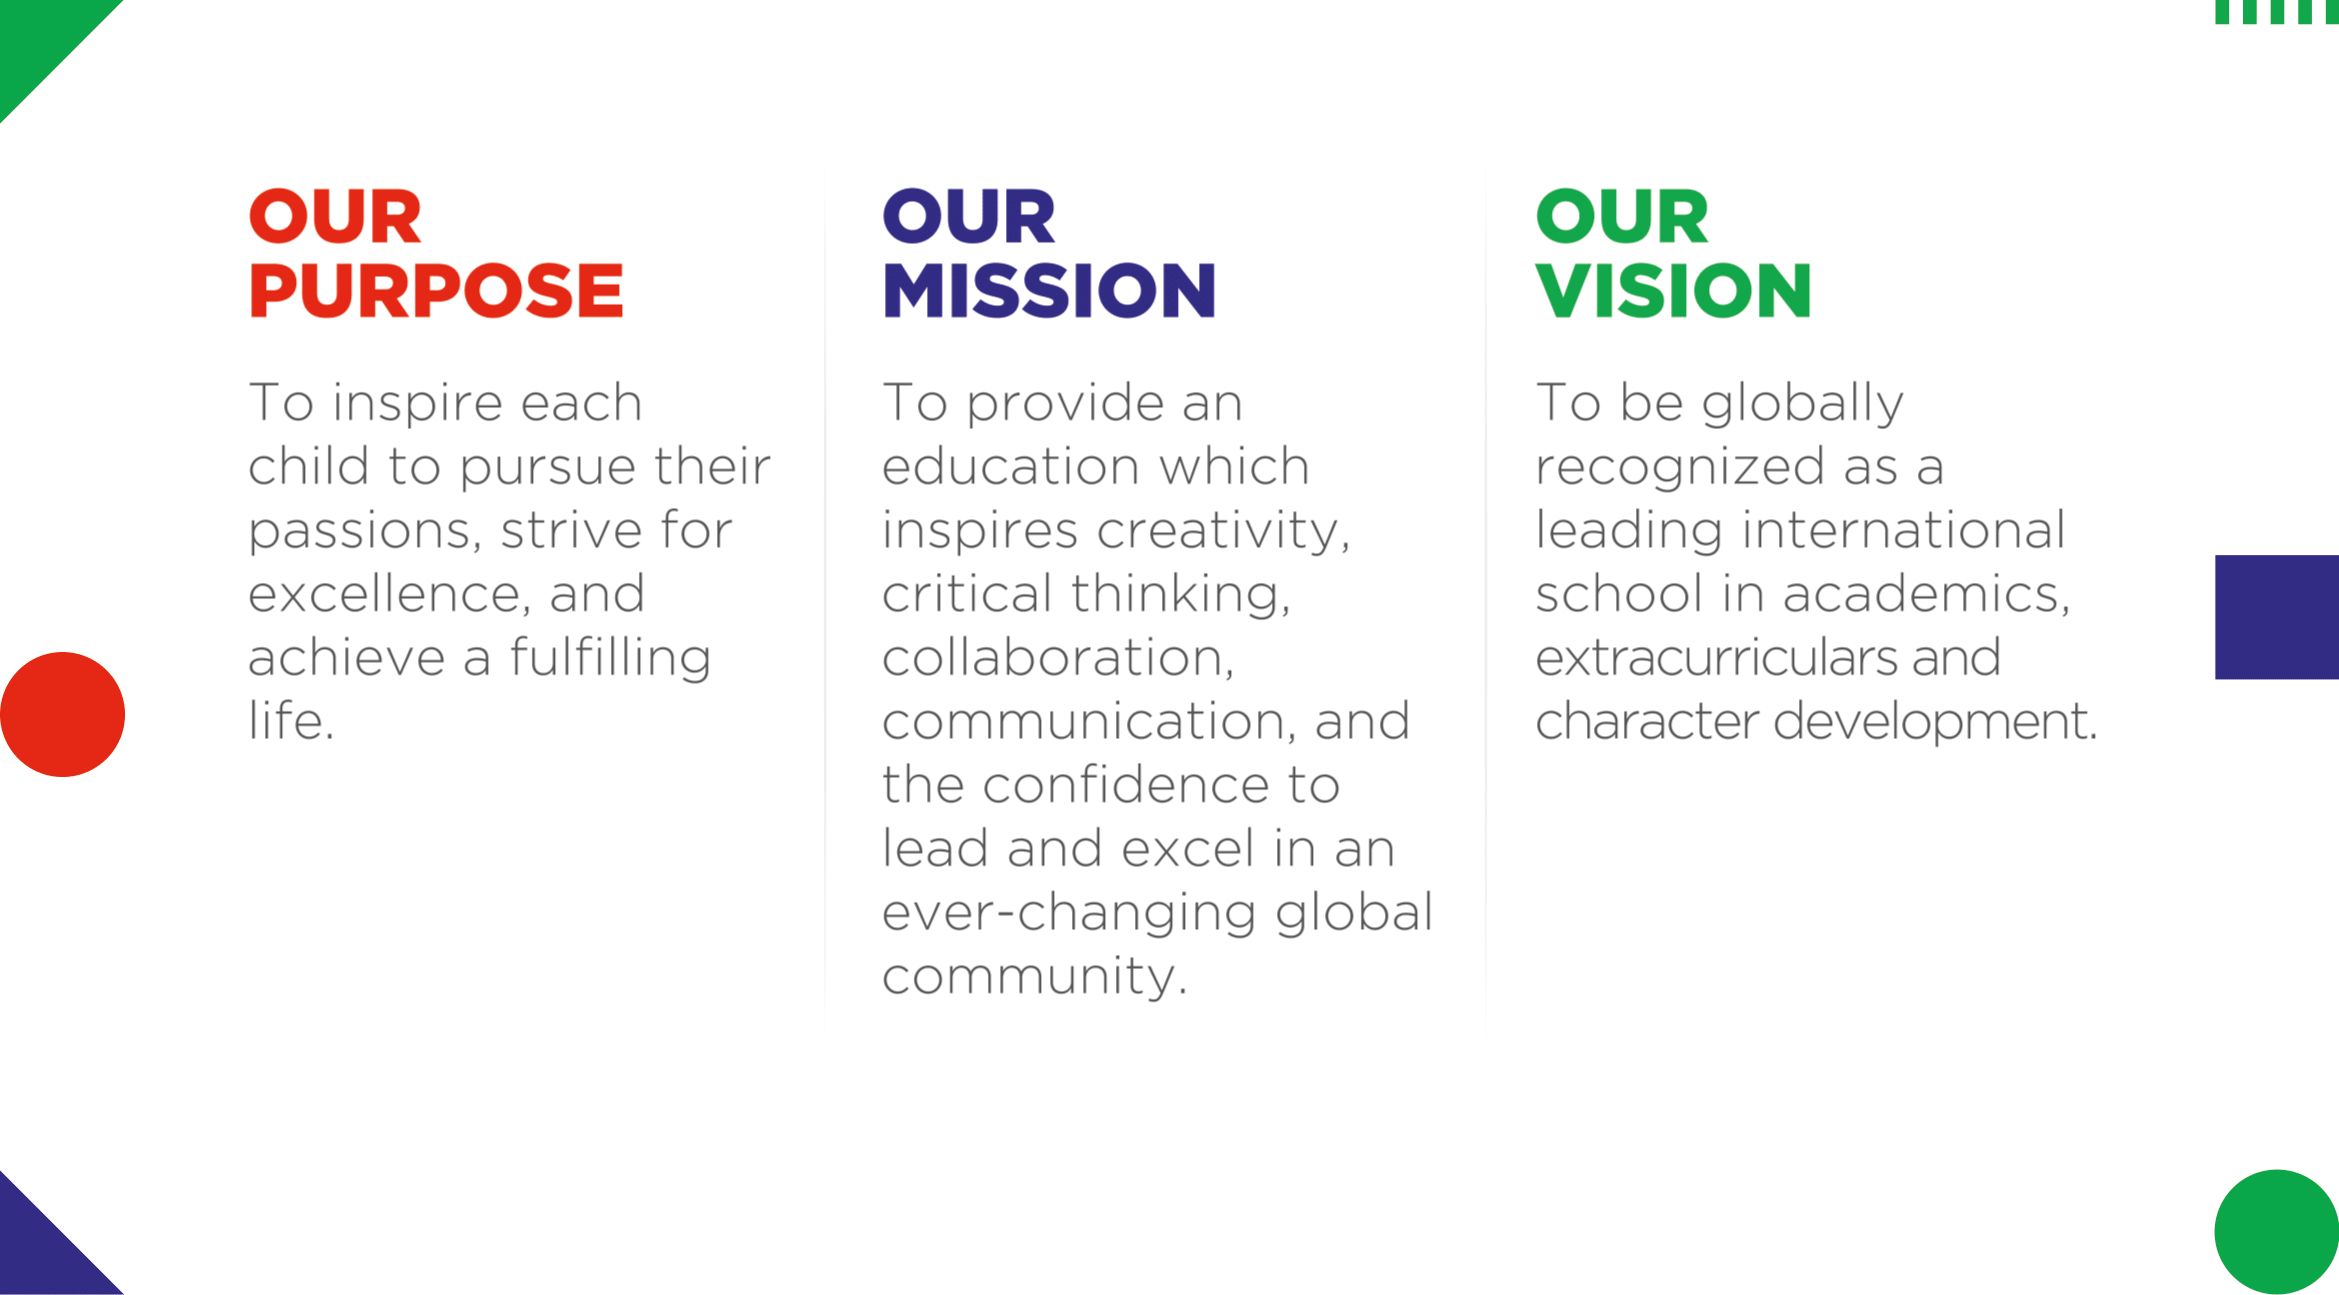 Our Purpose: To inspire each child to pursue their passions, strive for excellence, and achieve a fulfilling life. Our Mission: To provide an education which inspires creativity, critical thinking, collaboration, communication and the confidence to lead an excel in an ever-changing global community. Our Vision: To be globally recognized as a leading international school in academics, extracurriculars and character development. Our Values: Integrity & Respect, Optimism & Compassion, Leadership & Community, Commitment to Learning.